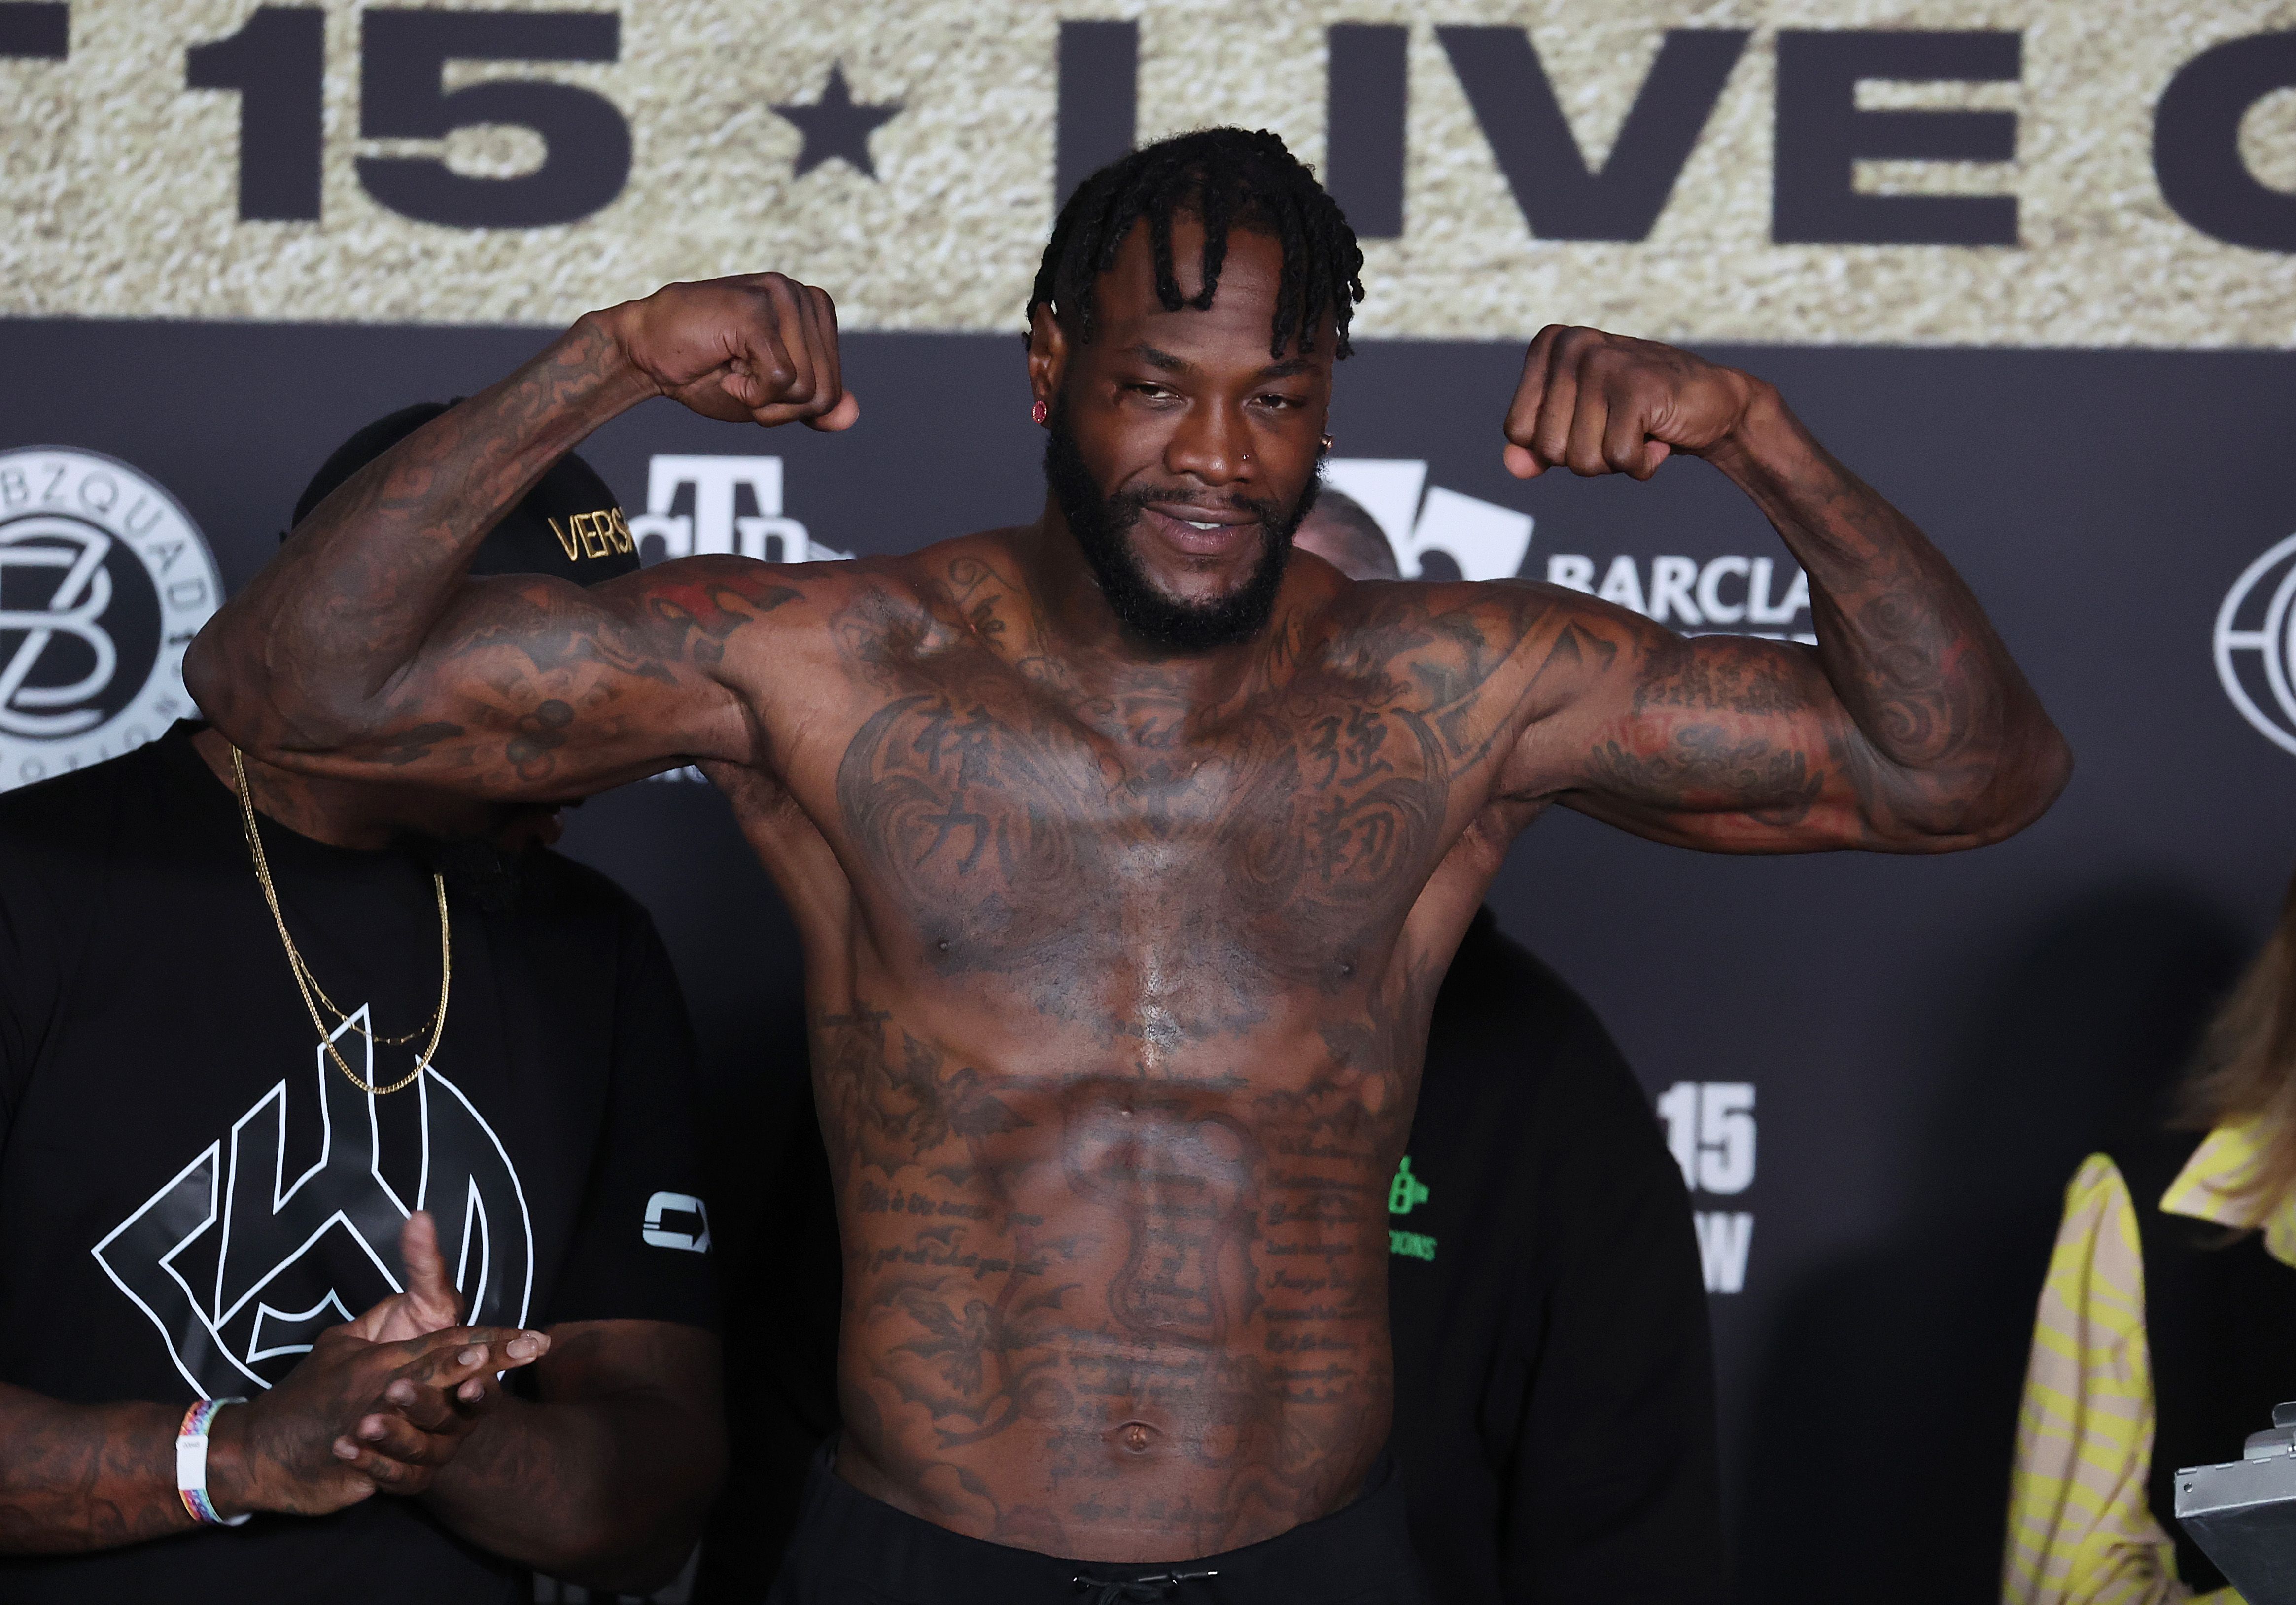 Most boxing fans want to see Deontay Wilder fight Anthony Joshua next